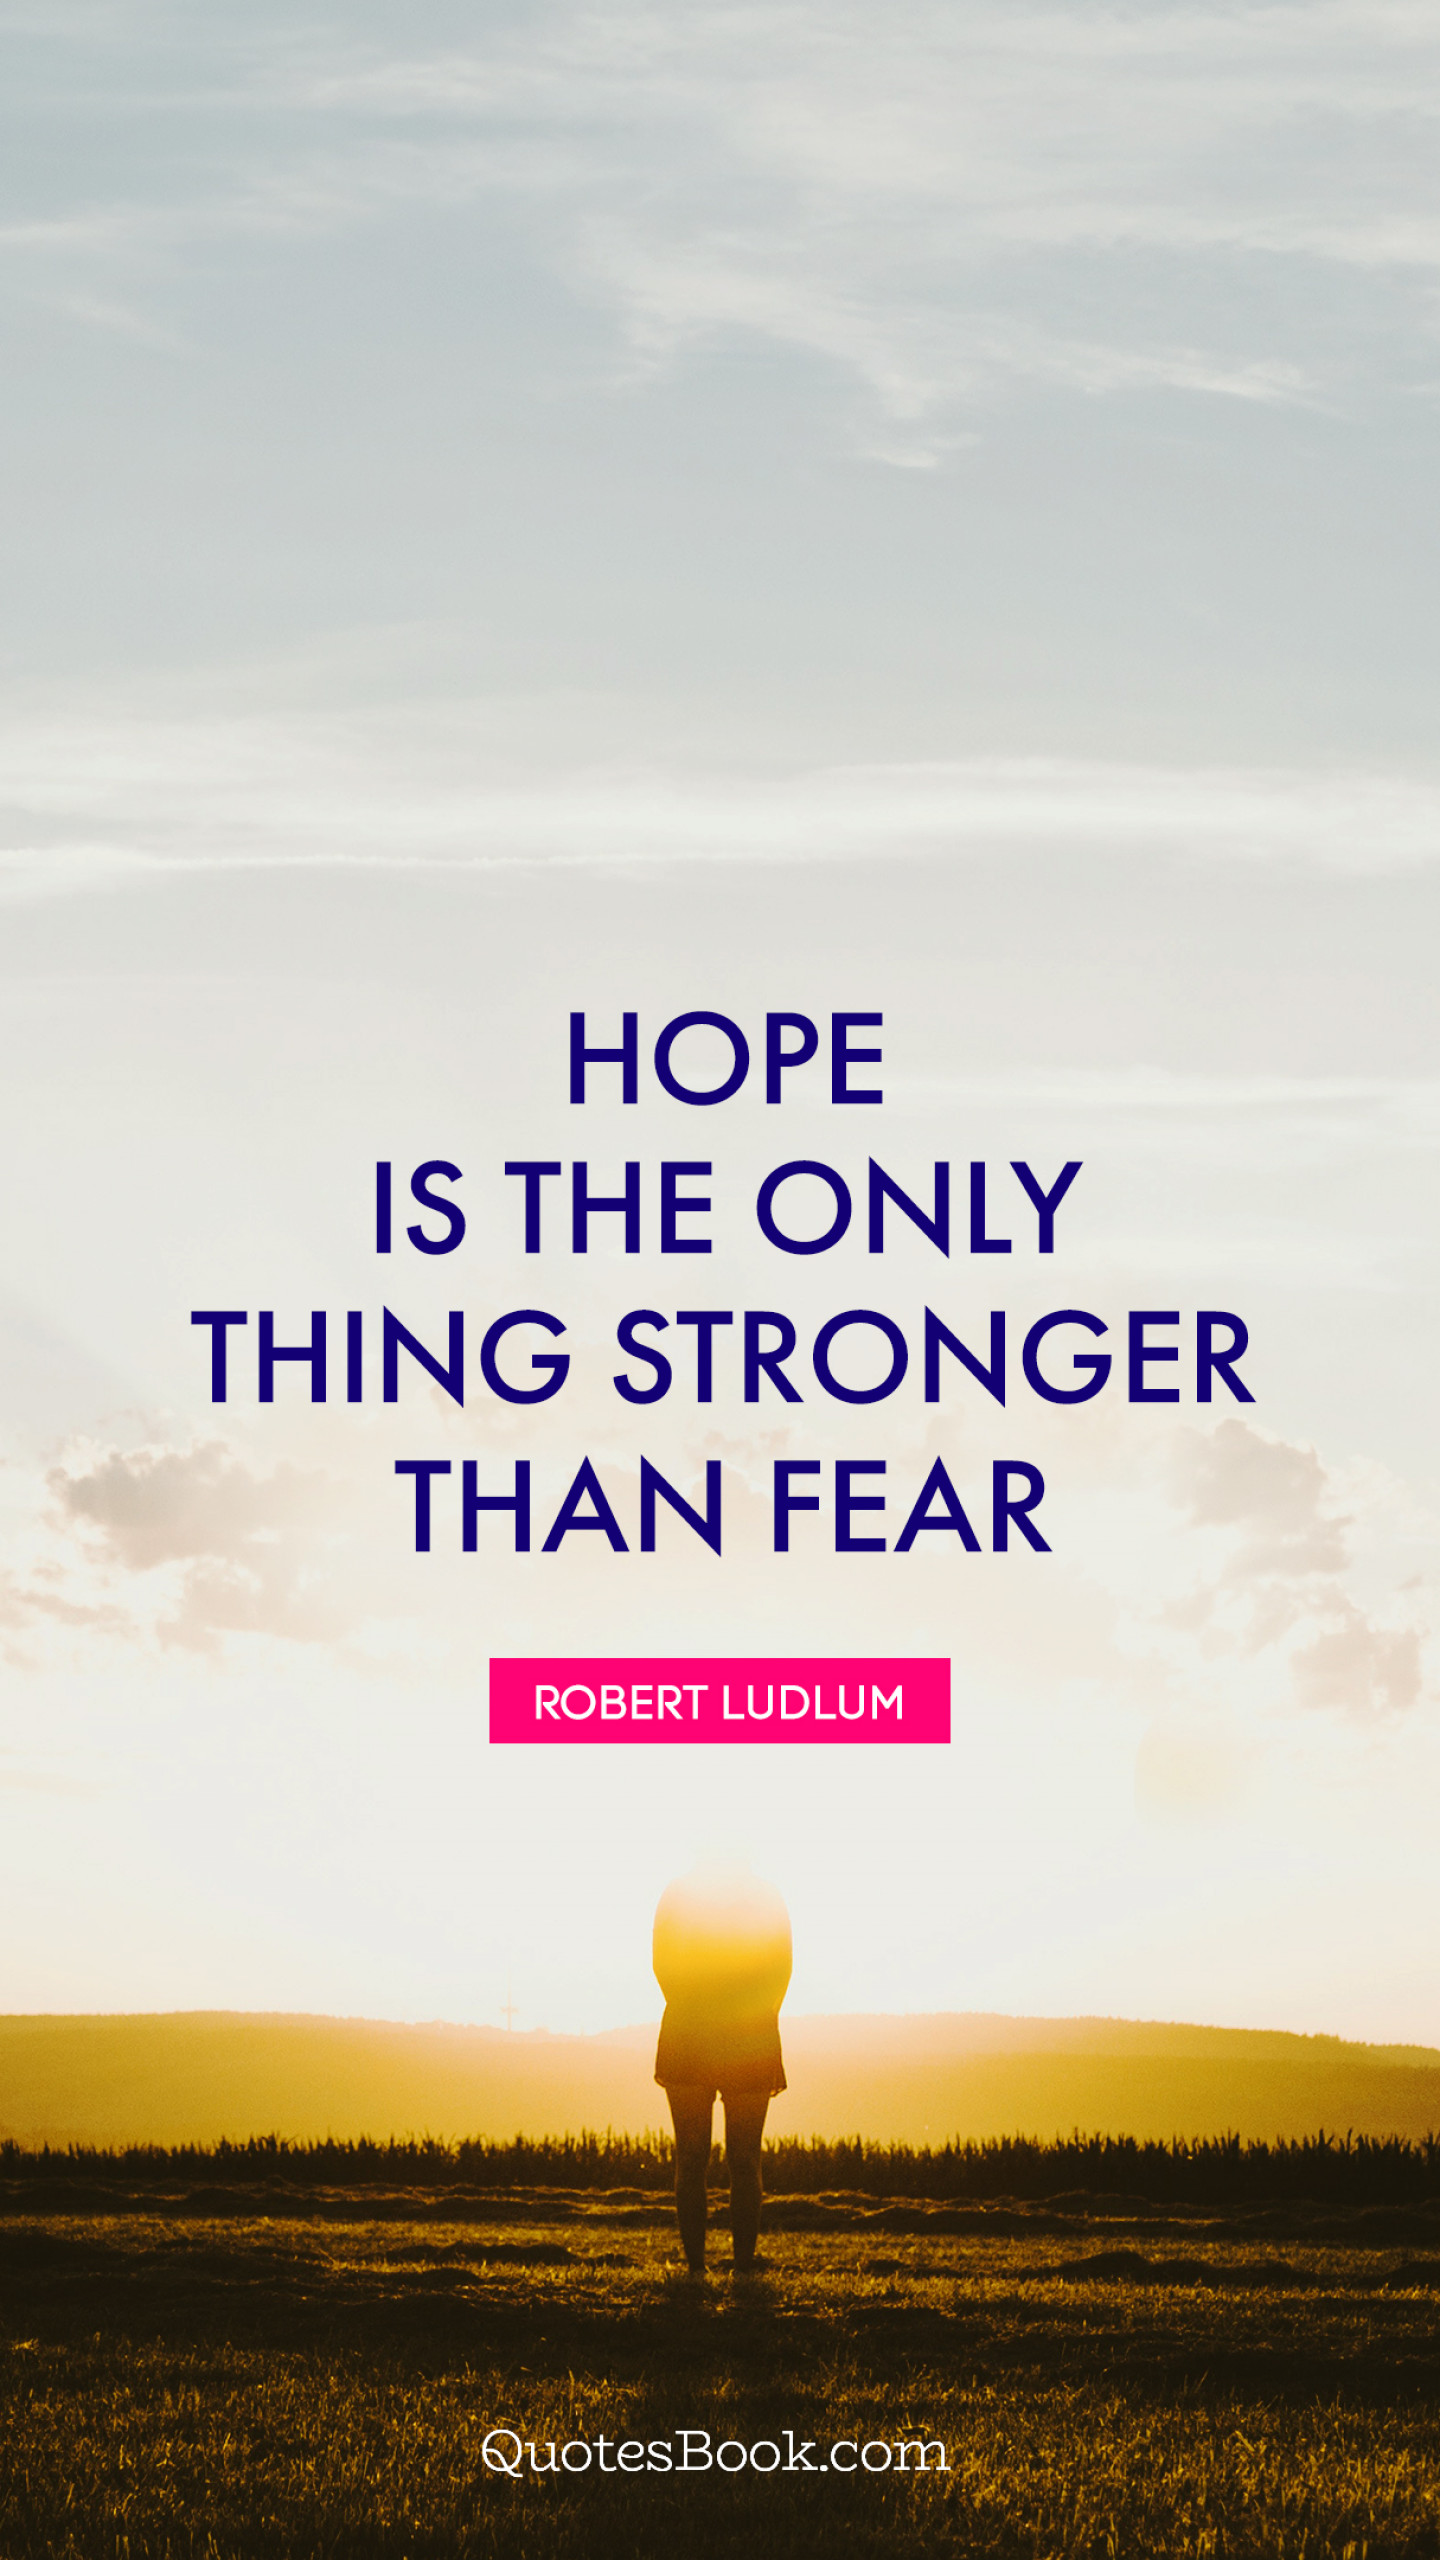 hope is the only thing stronger than fear 1440x2560 1119